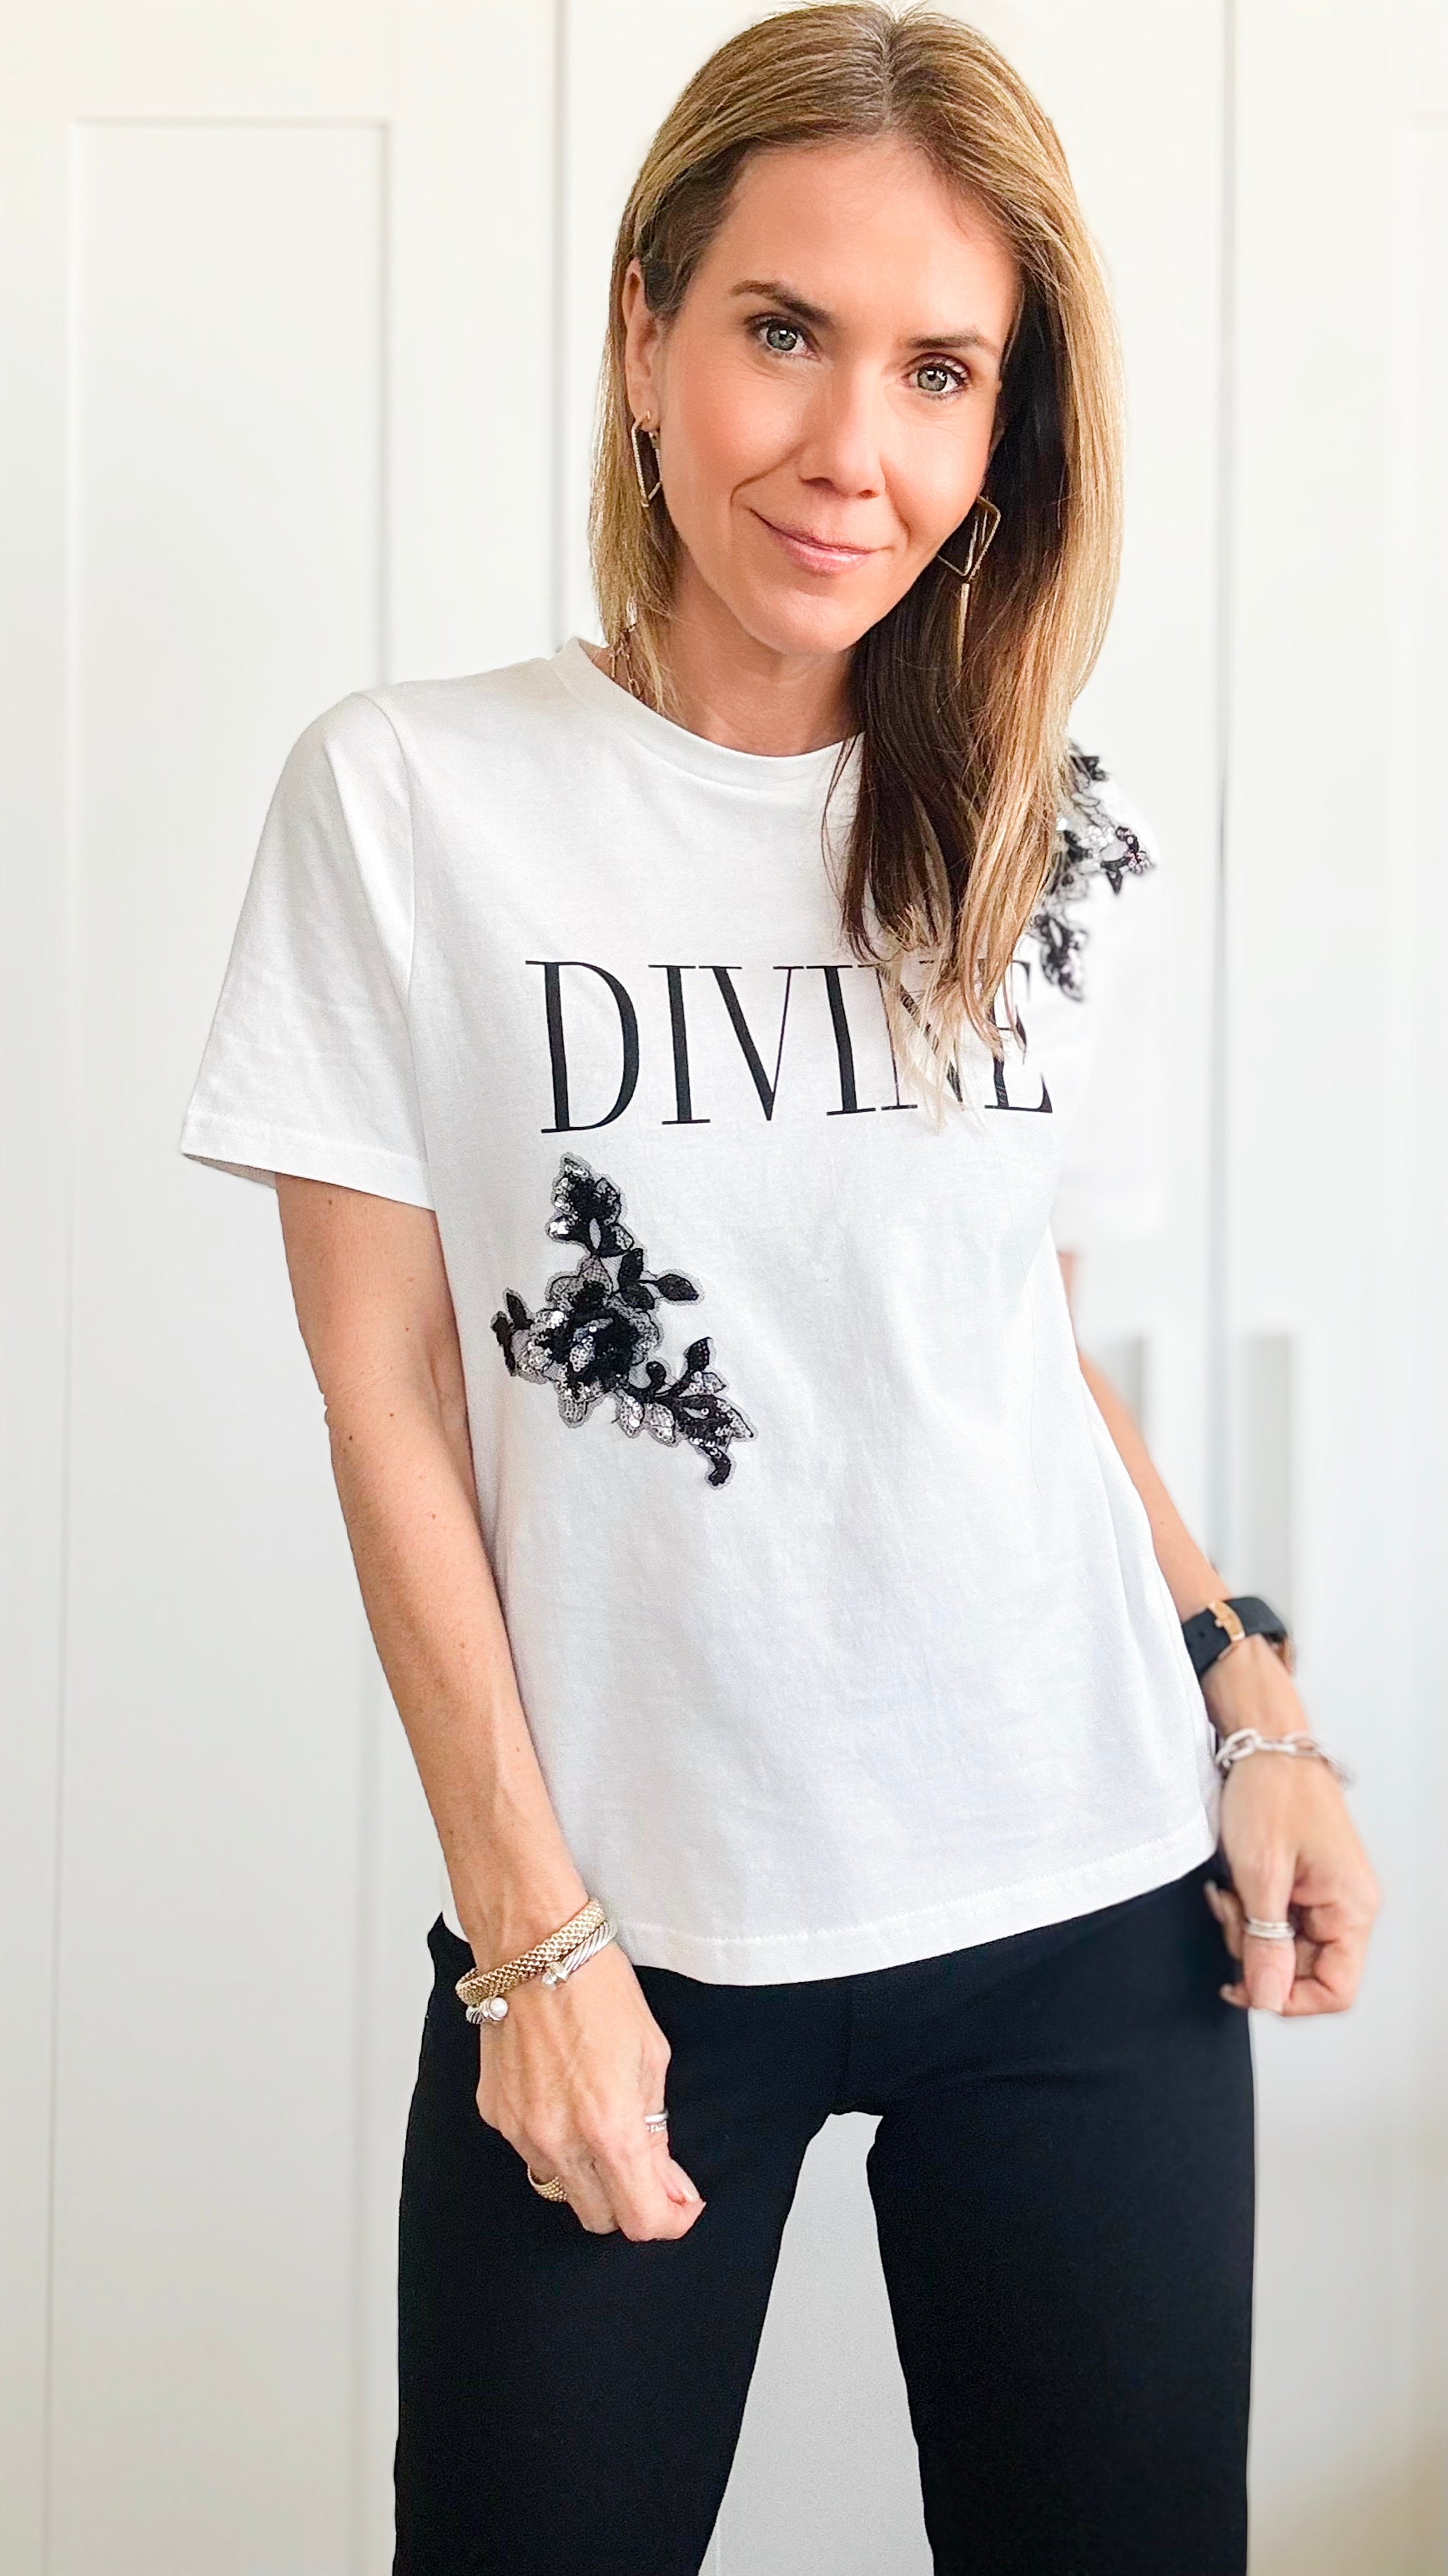 Divine Floral Embellished Top-110 Short Sleeve Tops-On Twelfth-Coastal Bloom Boutique, find the trendiest versions of the popular styles and looks Located in Indialantic, FL